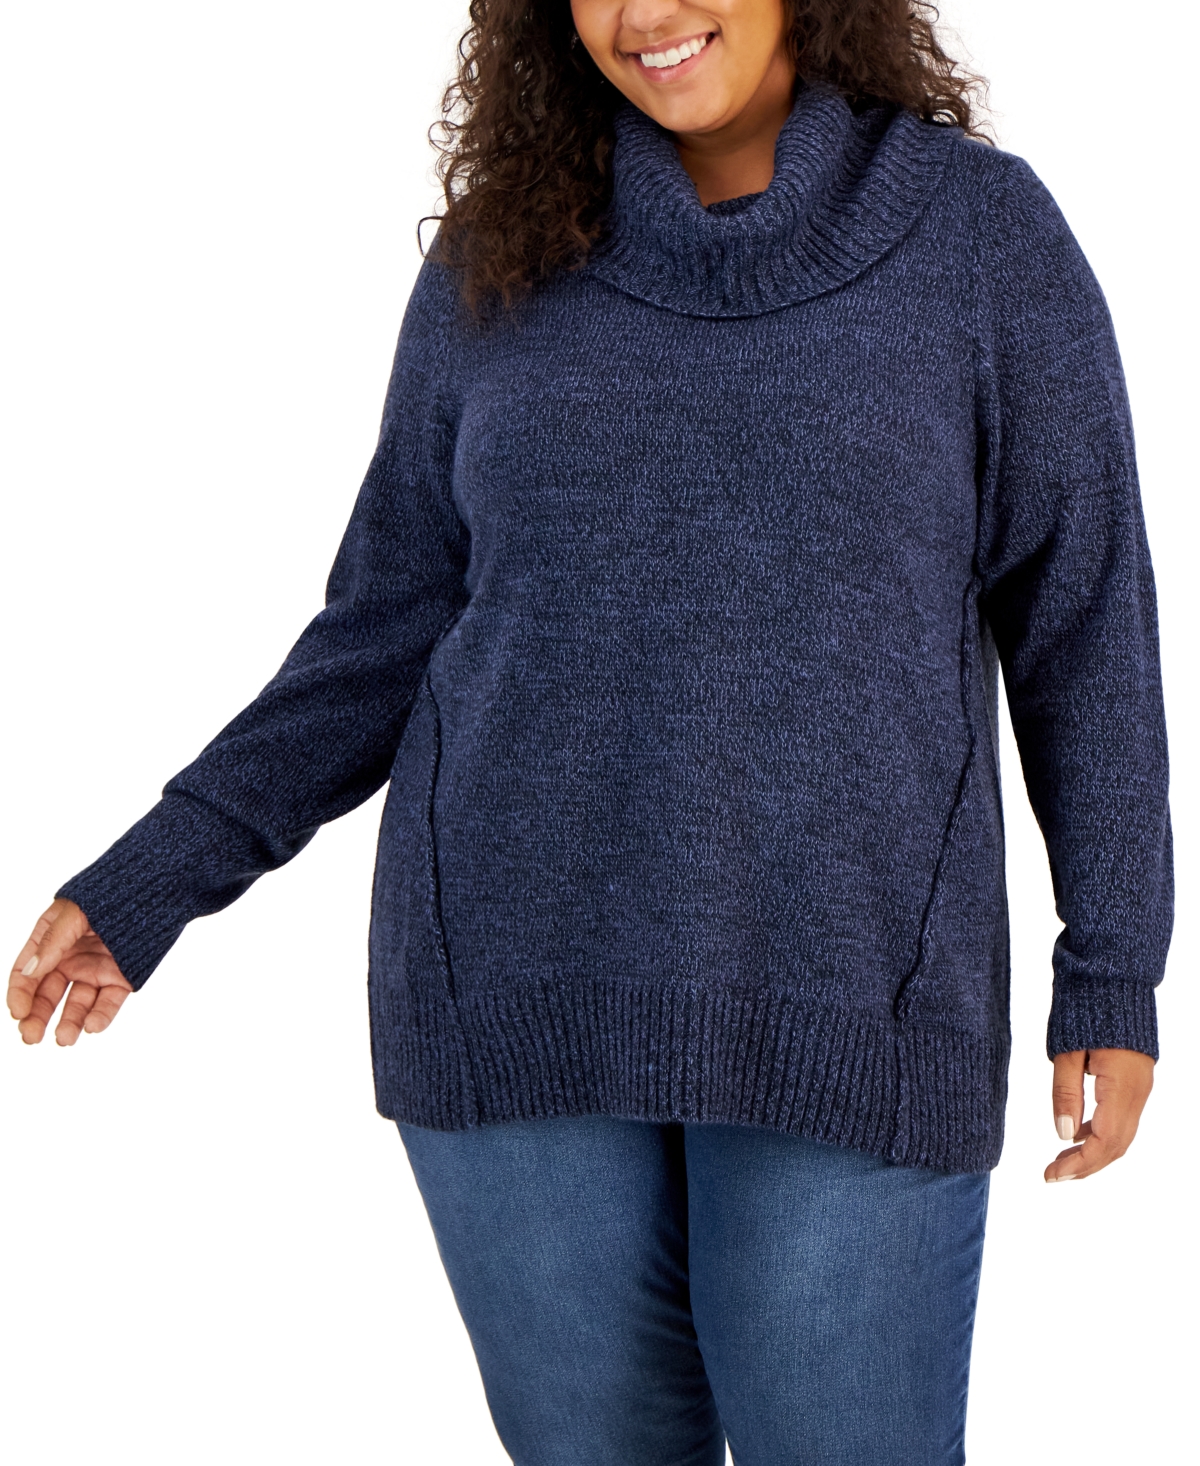 Plus Size Cowlneck Sweater, Created for Macy's - Midnight Marl